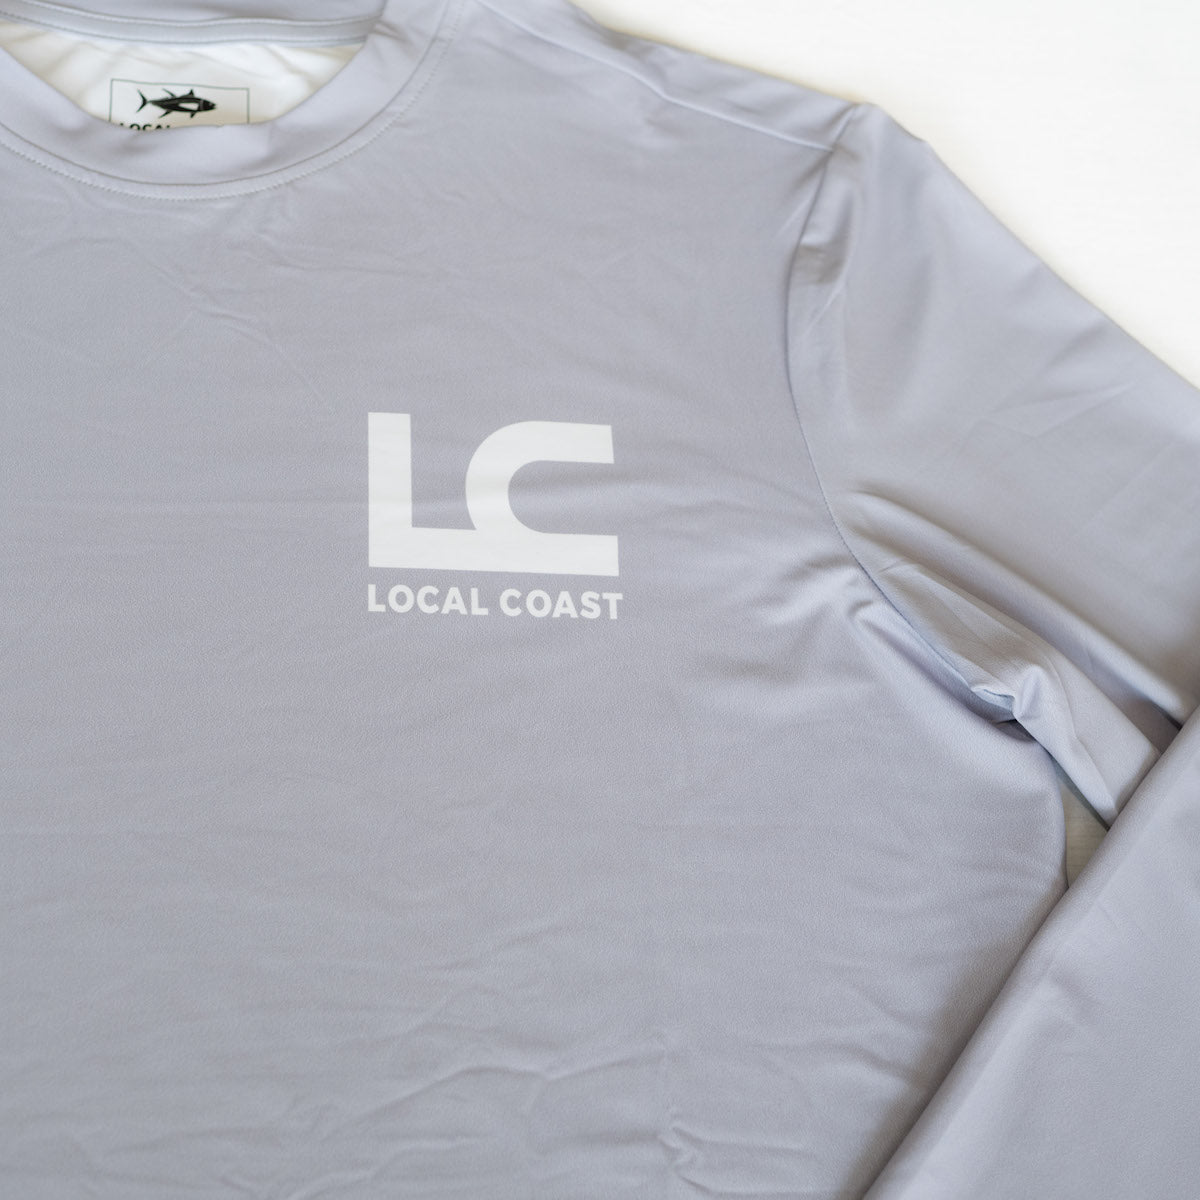 Listen to the Locals™ Performance Shirt